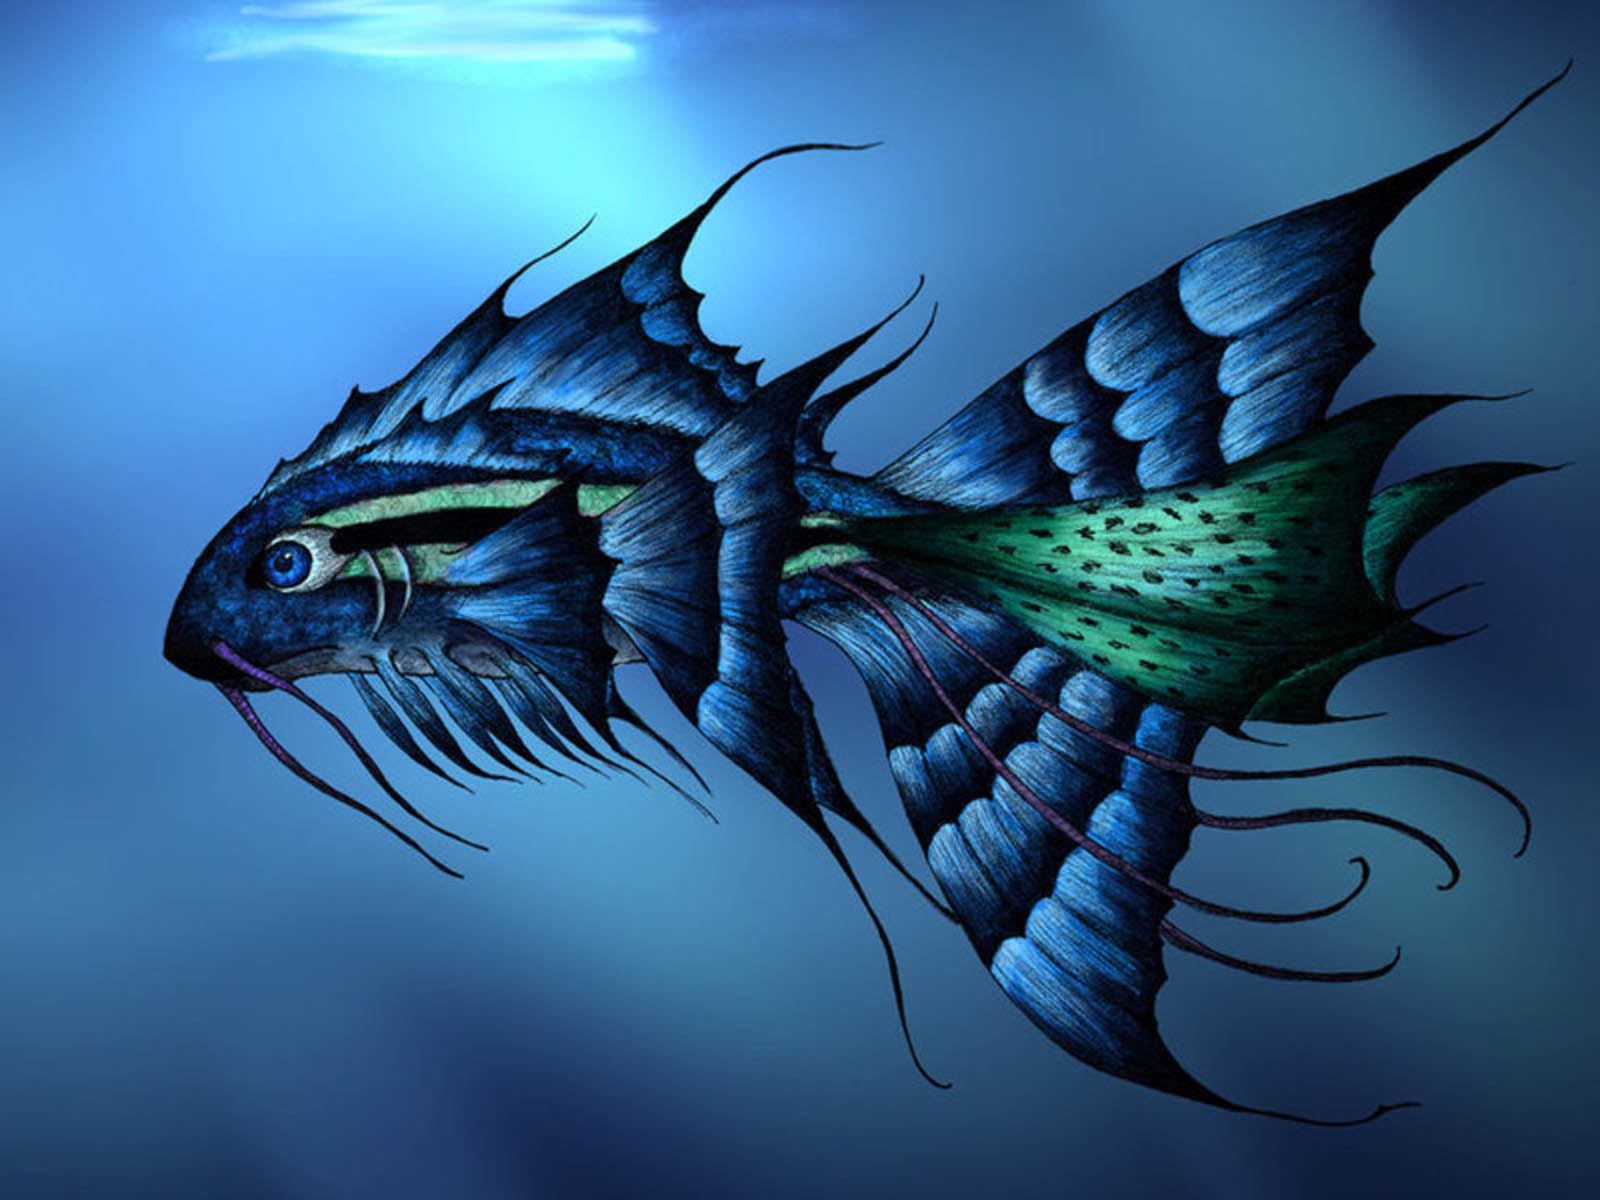  wallpapers  3D Fish  Wallpapers 